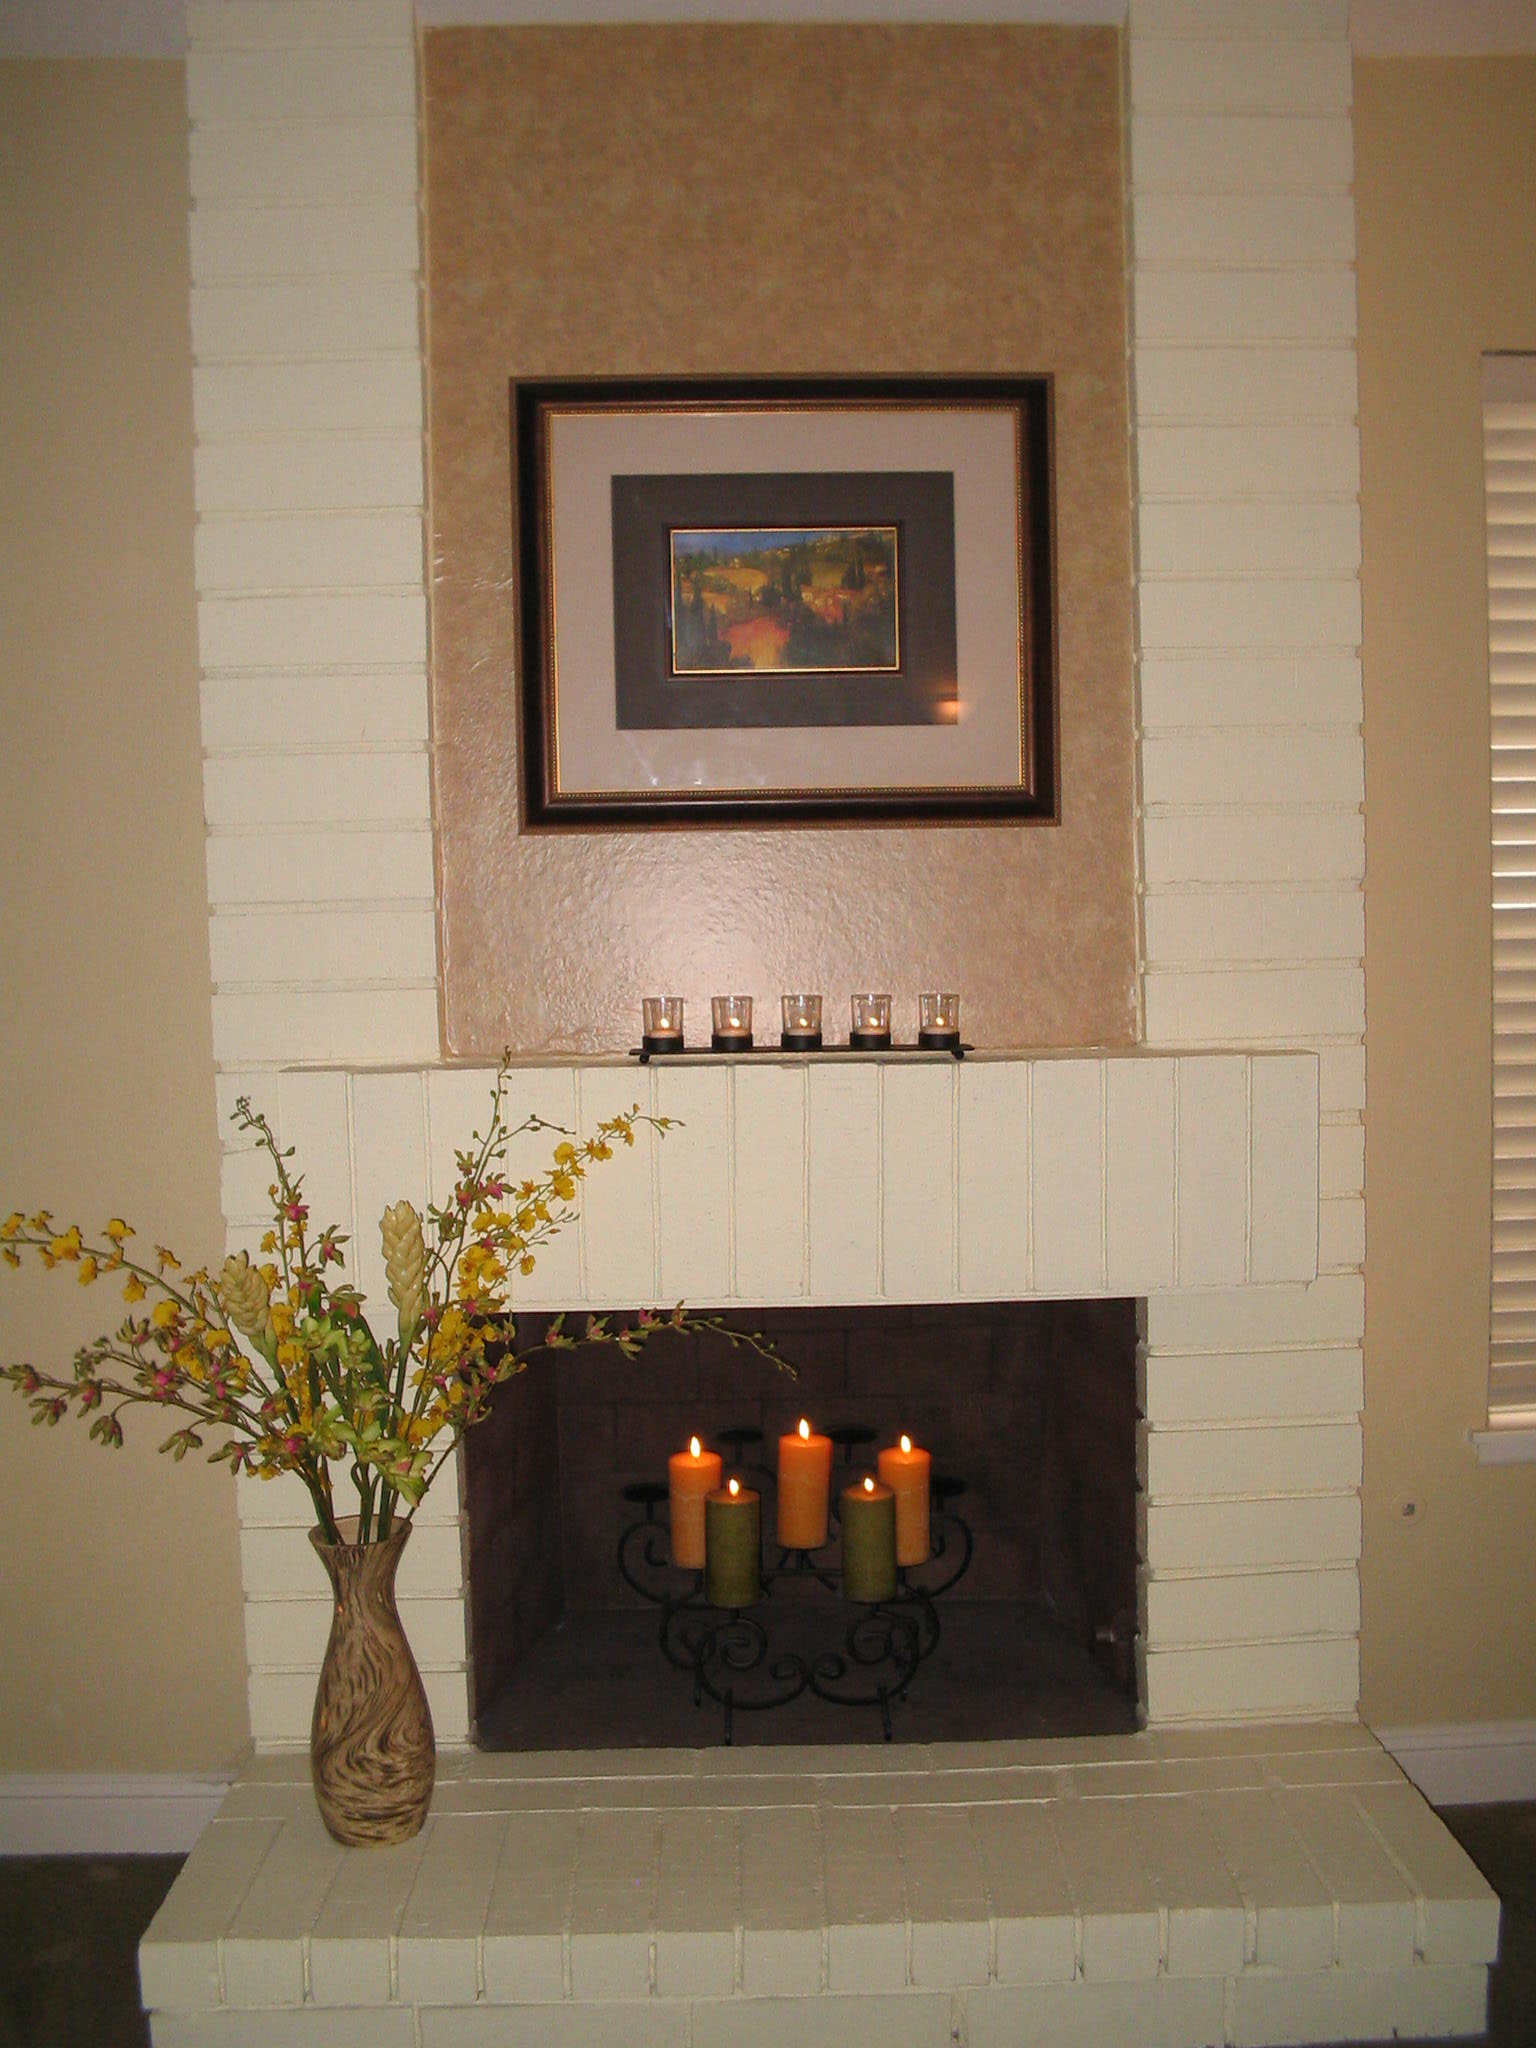 After fireplace is a true focal point